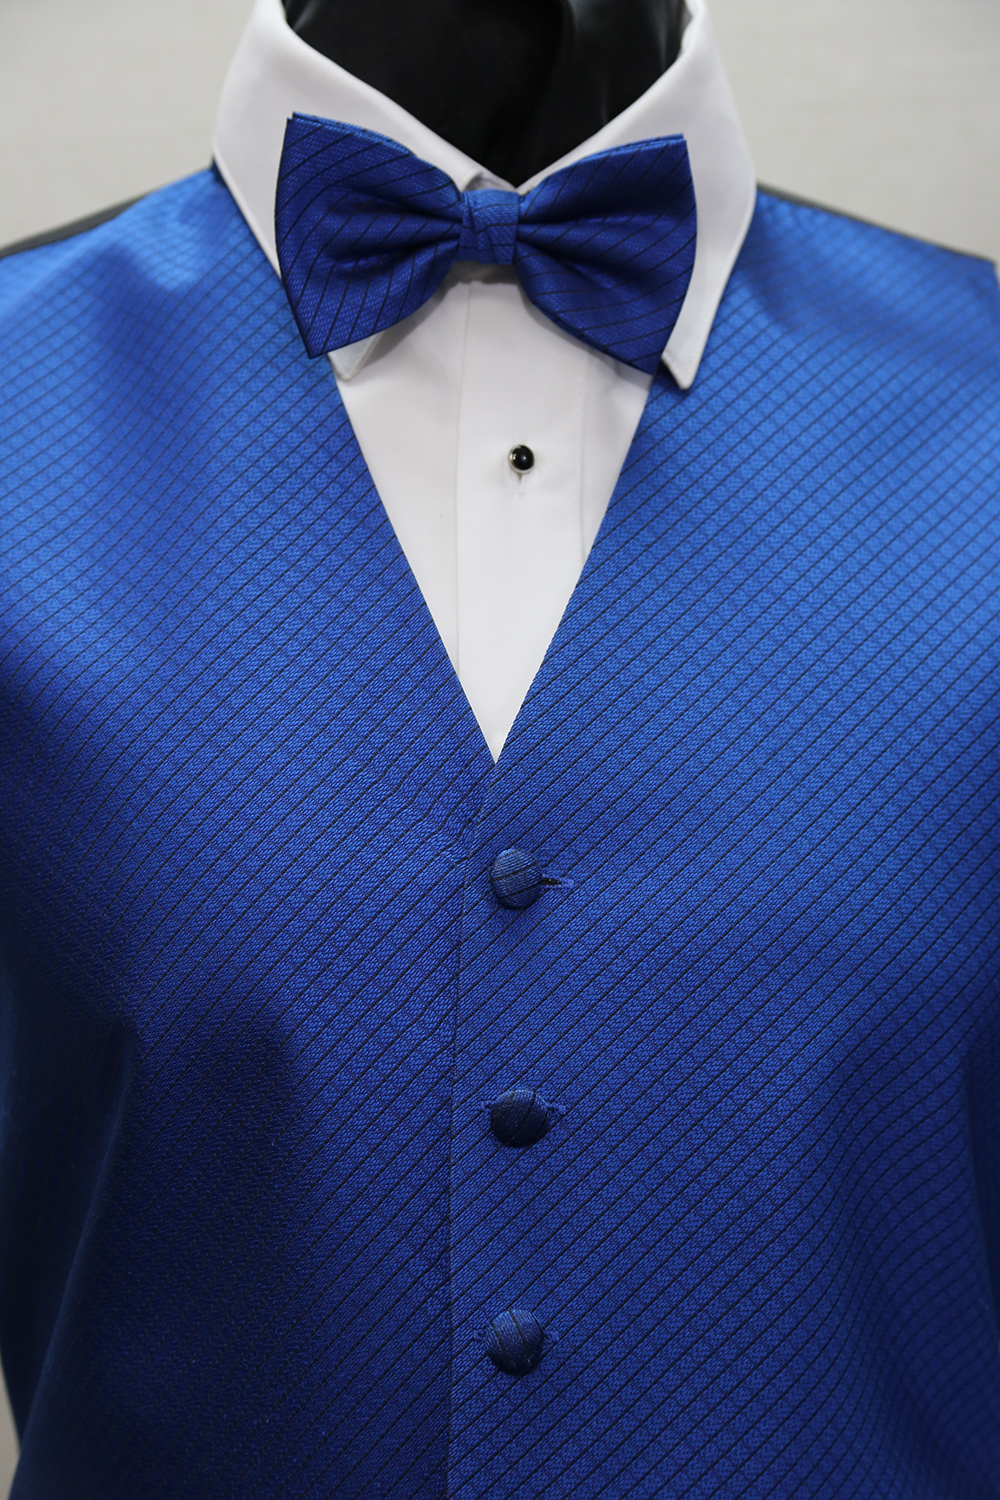 Men's Formal Bow Tie or Long Tie Cardi Collection "Palermo" Blue Ice 